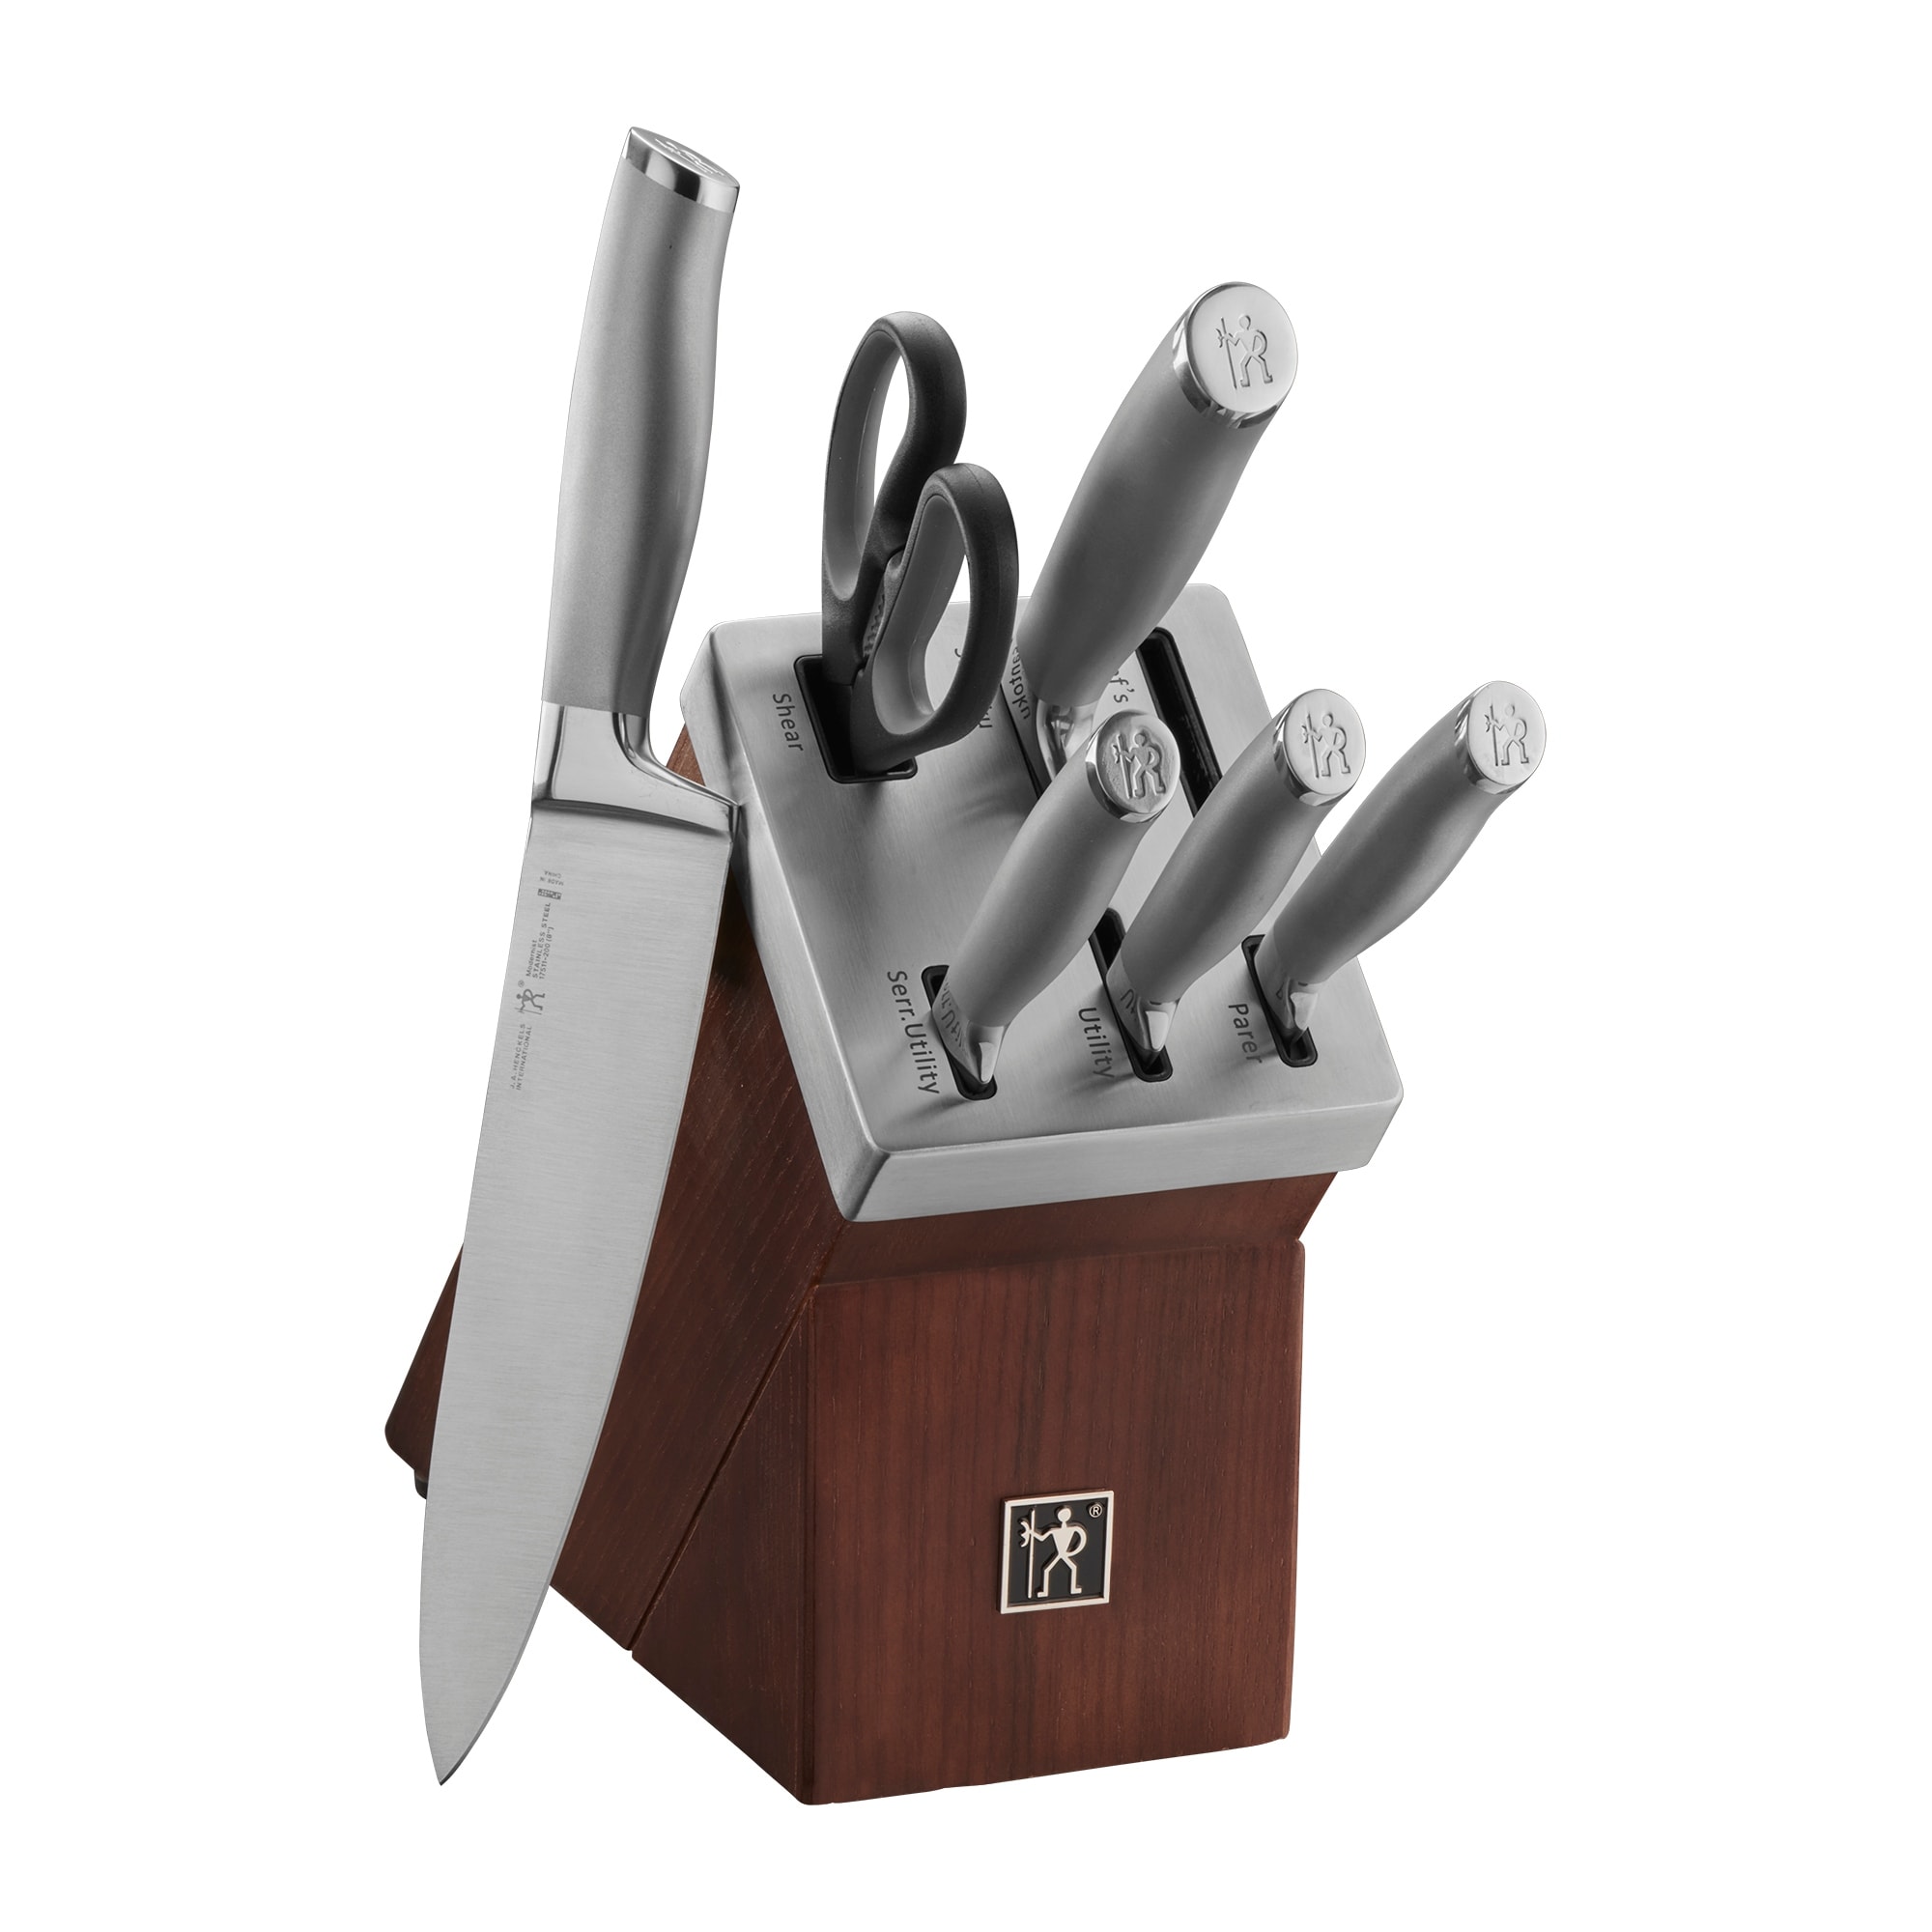 https://ak1.ostkcdn.com/images/products/is/images/direct/9c1f47f14204d8c8f7e79cf6a2ed8760c9b50ce9/Henckels-Modernist-7-pc-Self-Sharpening-Block-Set.jpg